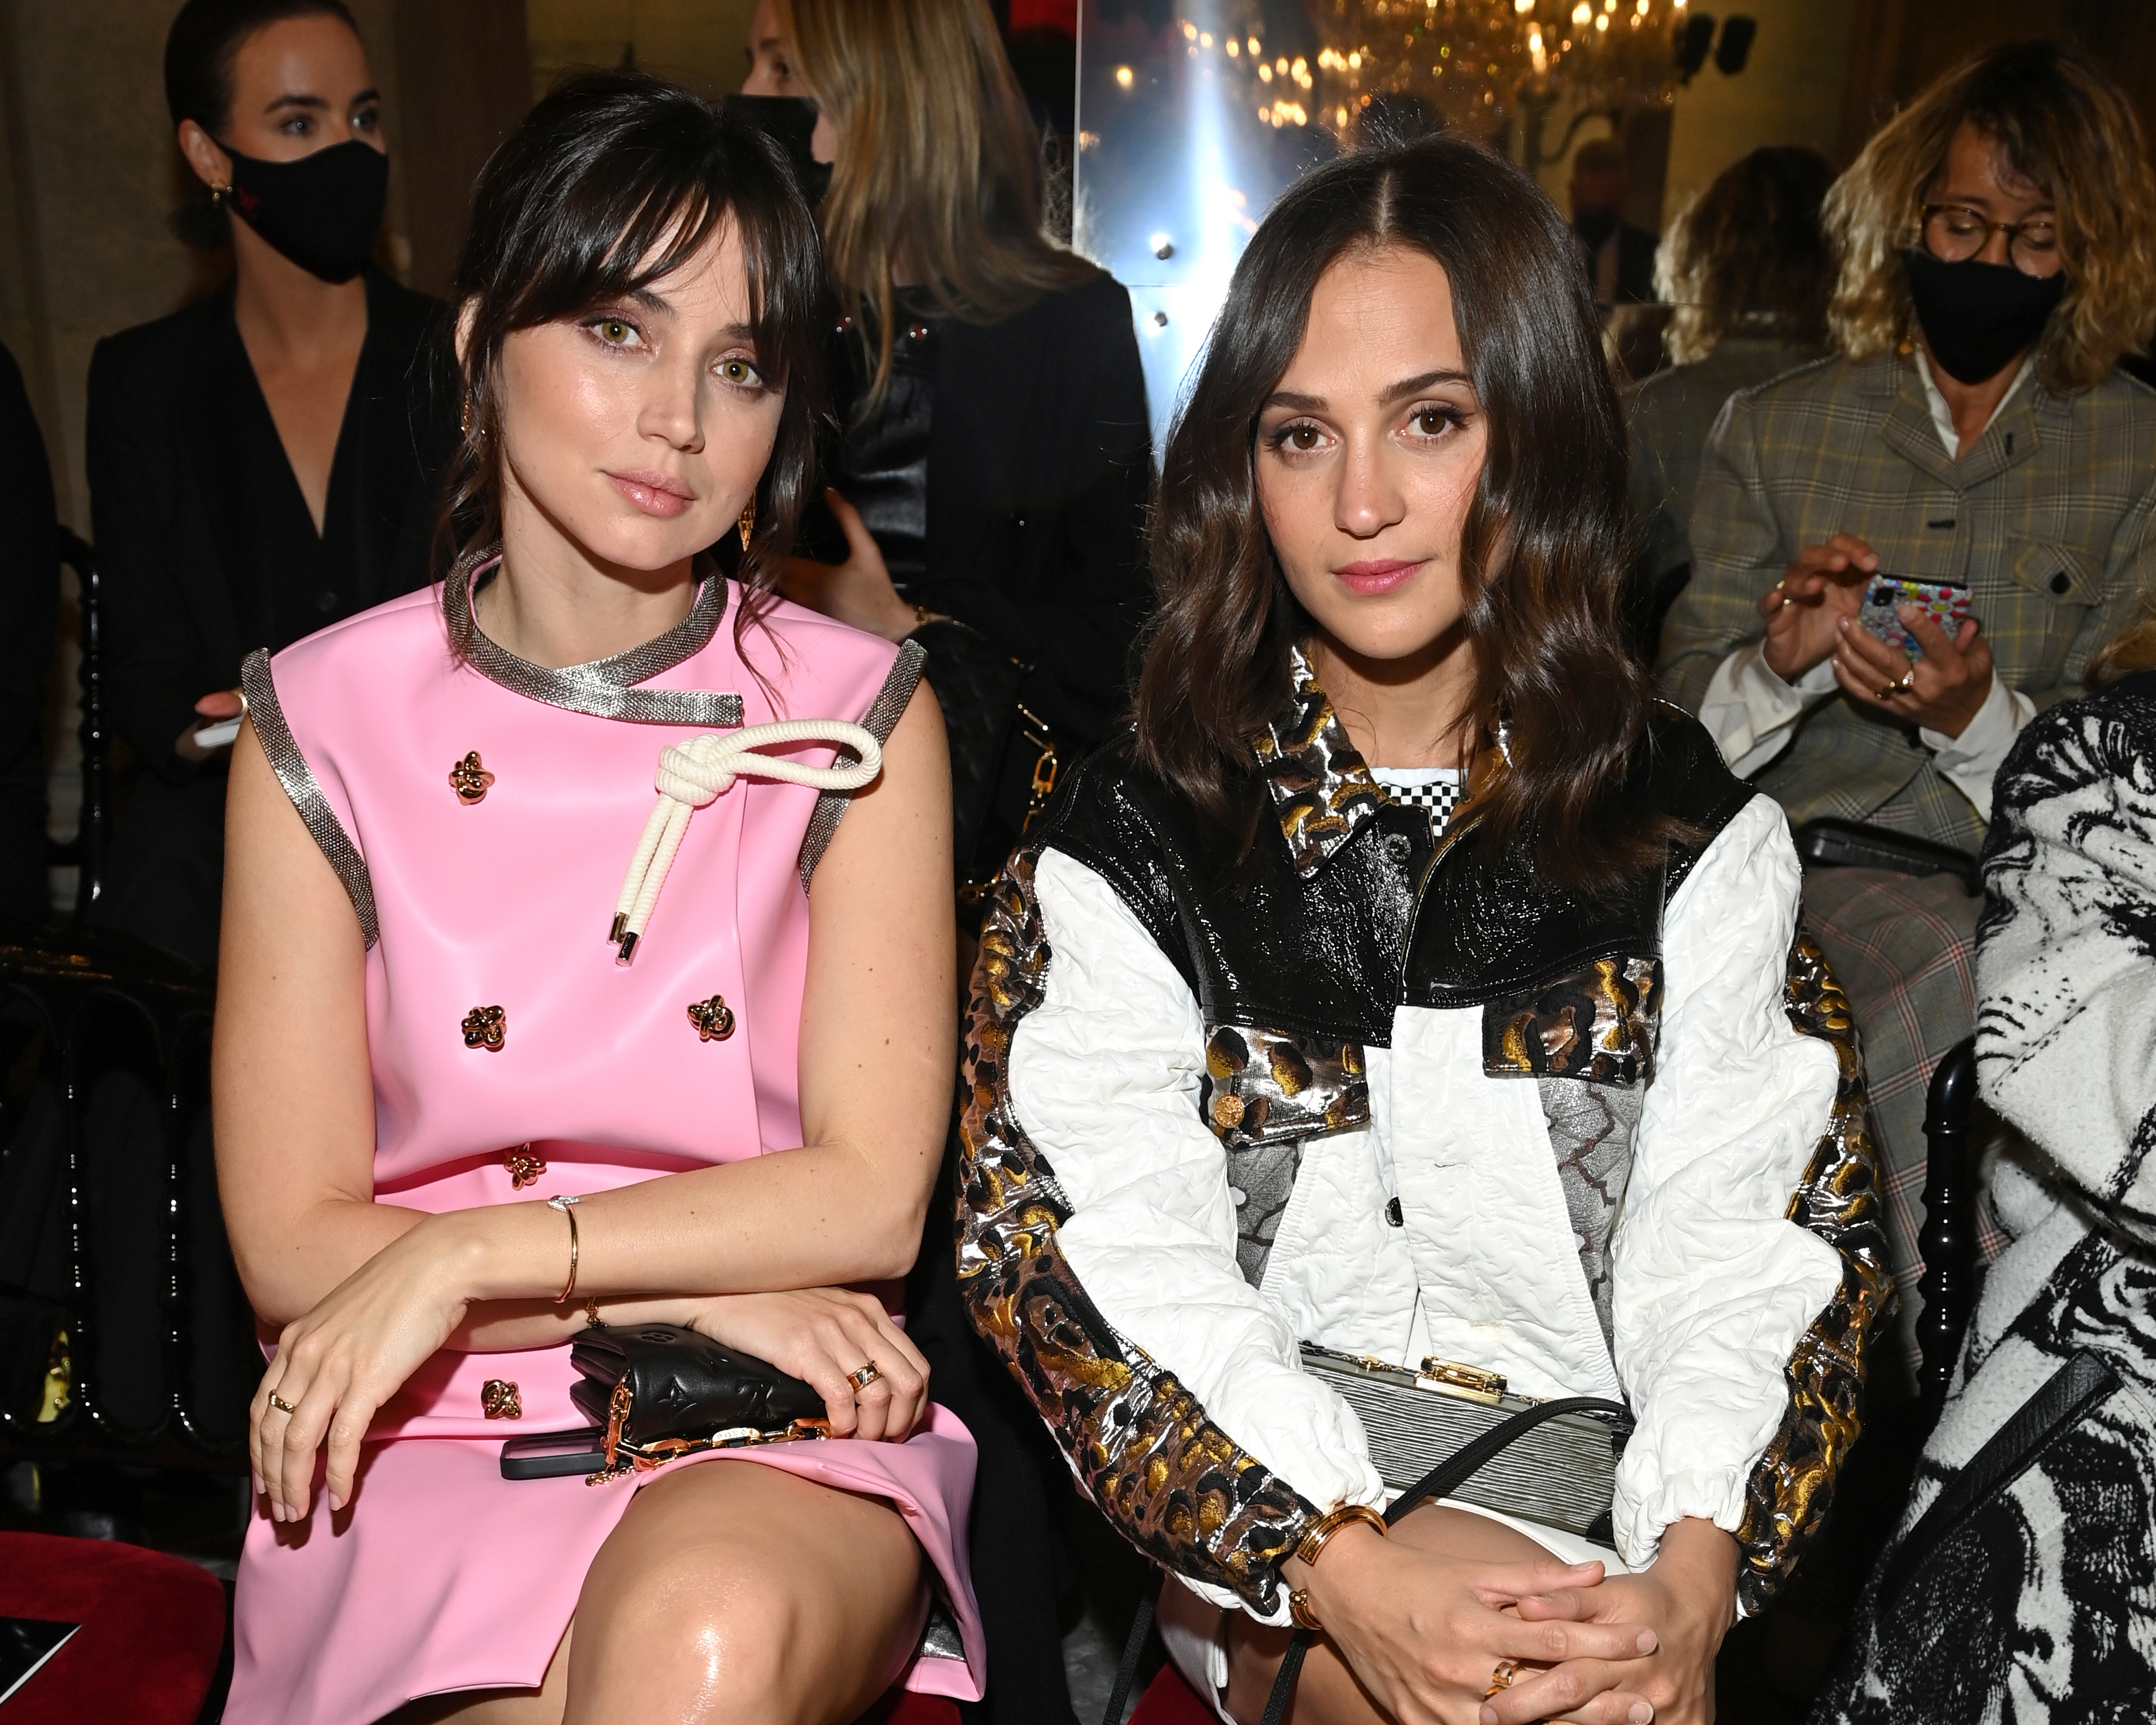 Actress Alicia Vikander attends the Louis Vuitton show as part of